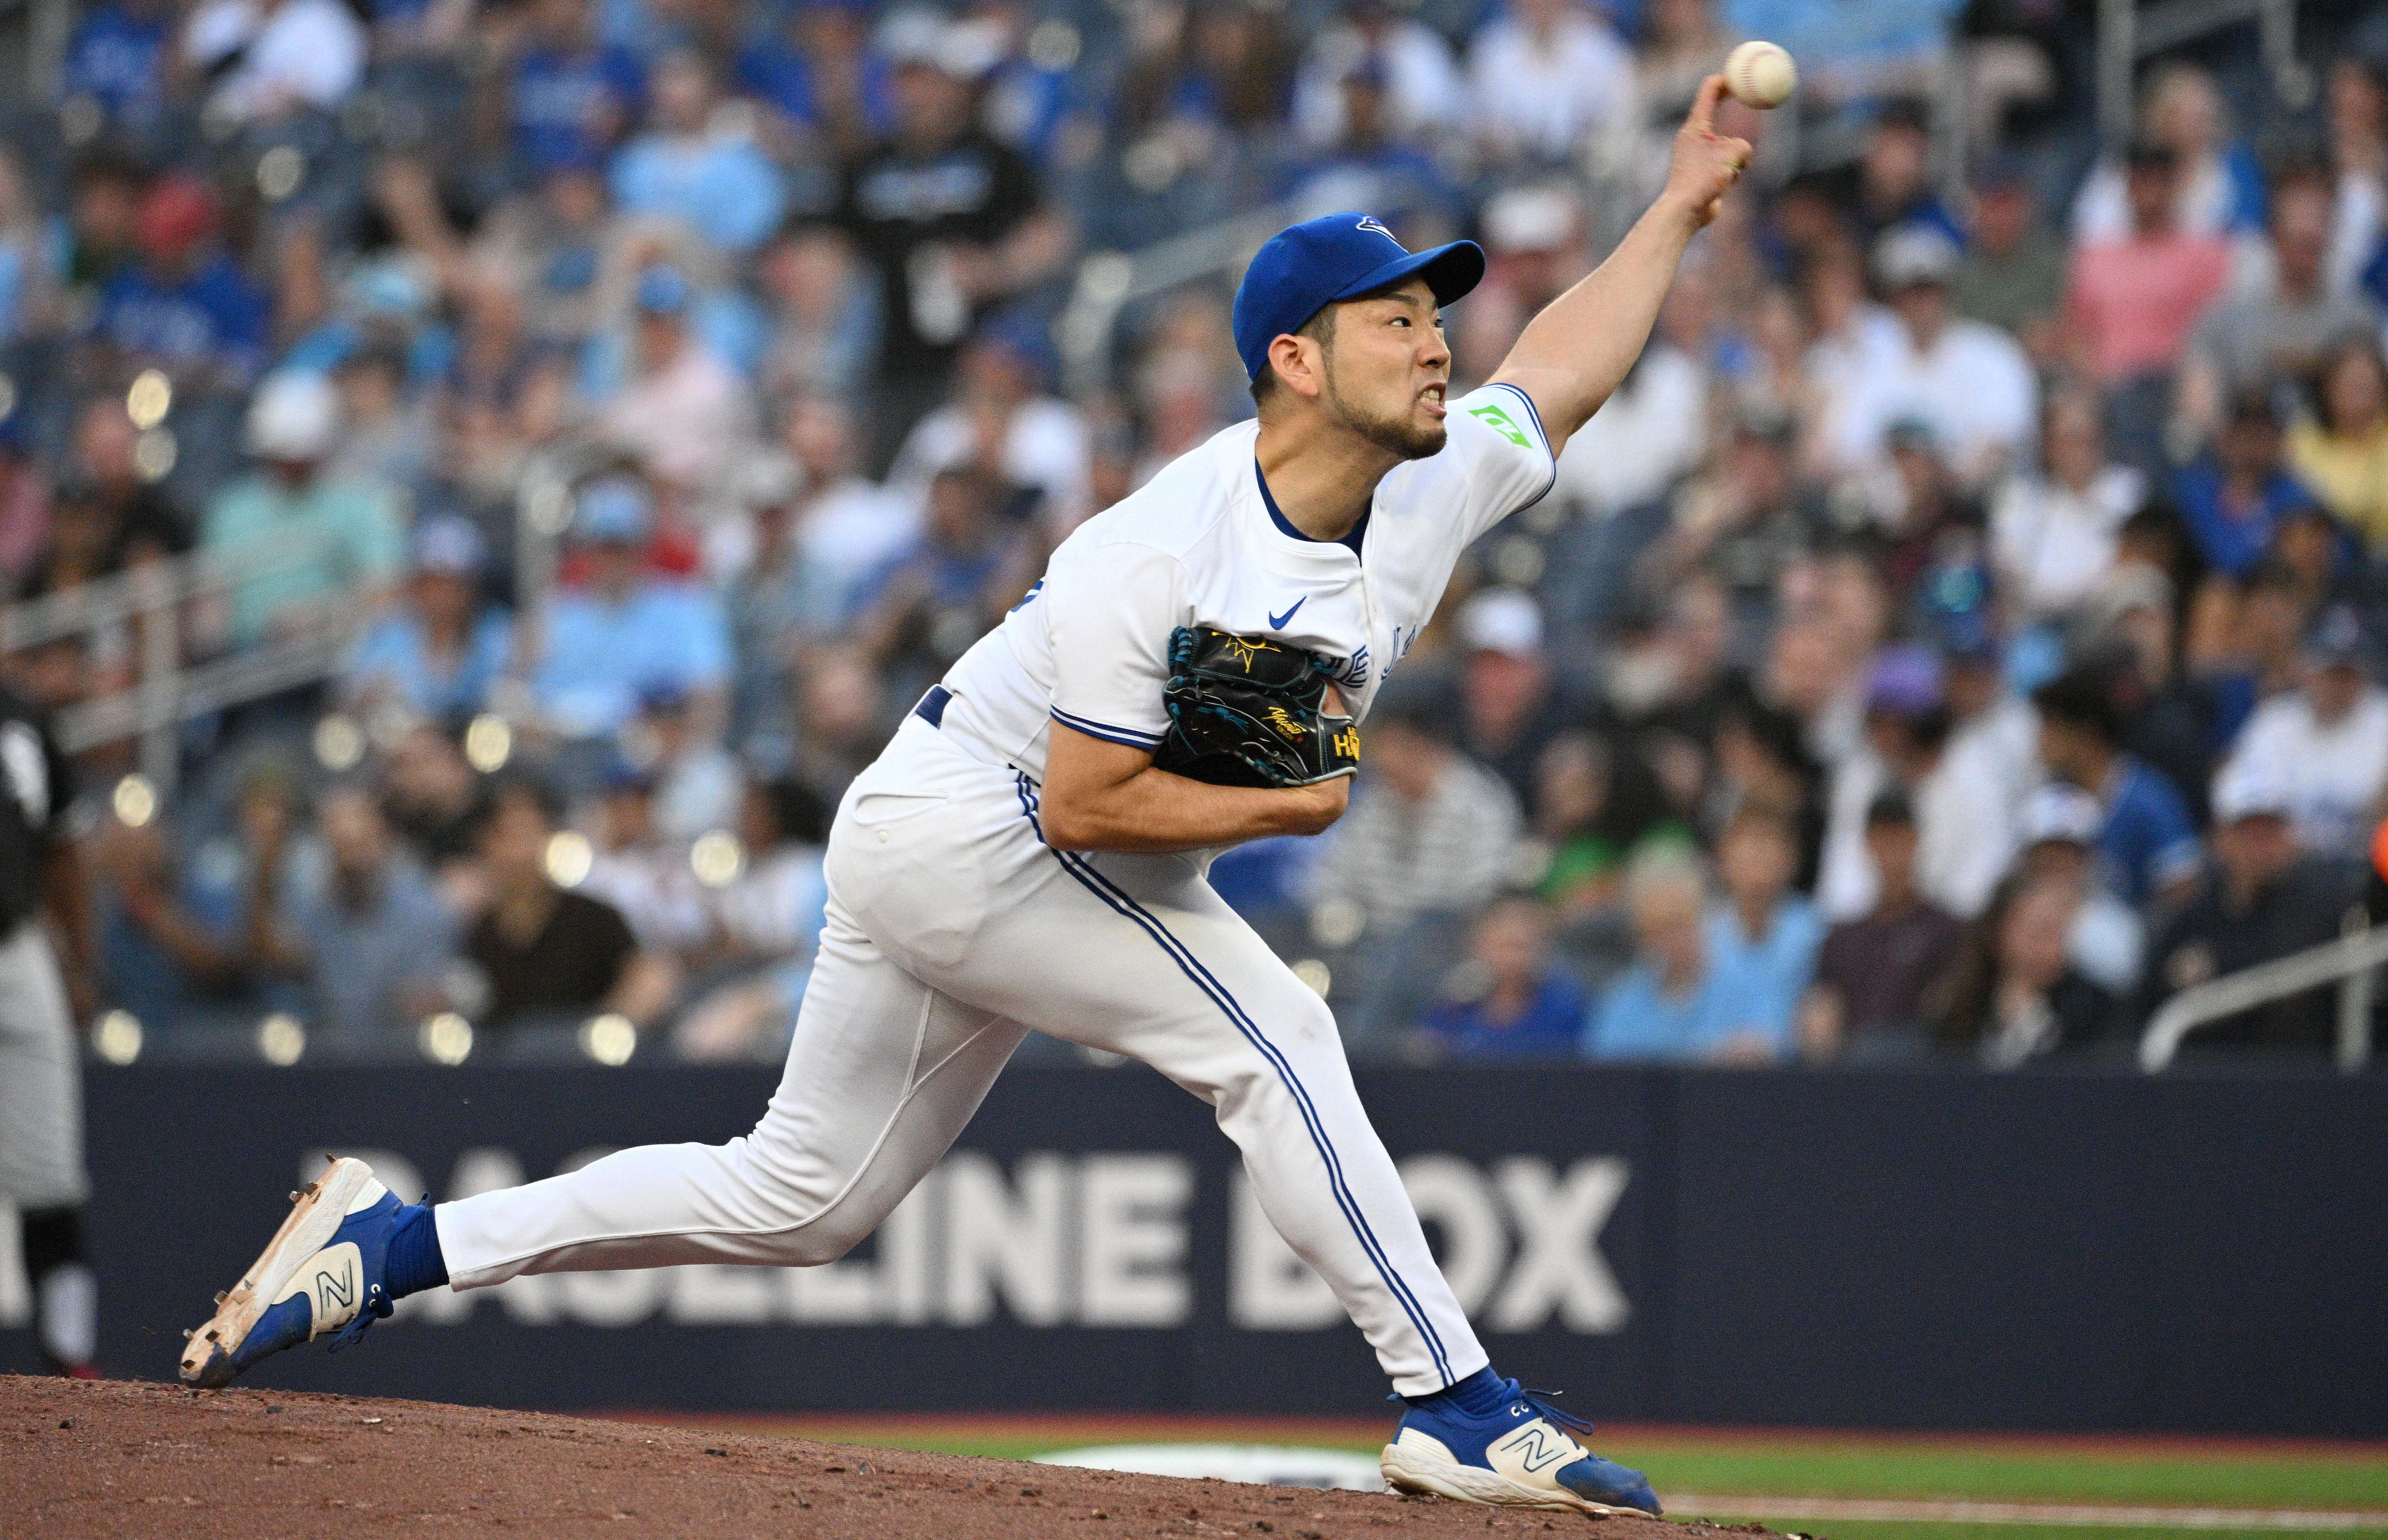 The Blue Jays have good pitching depth